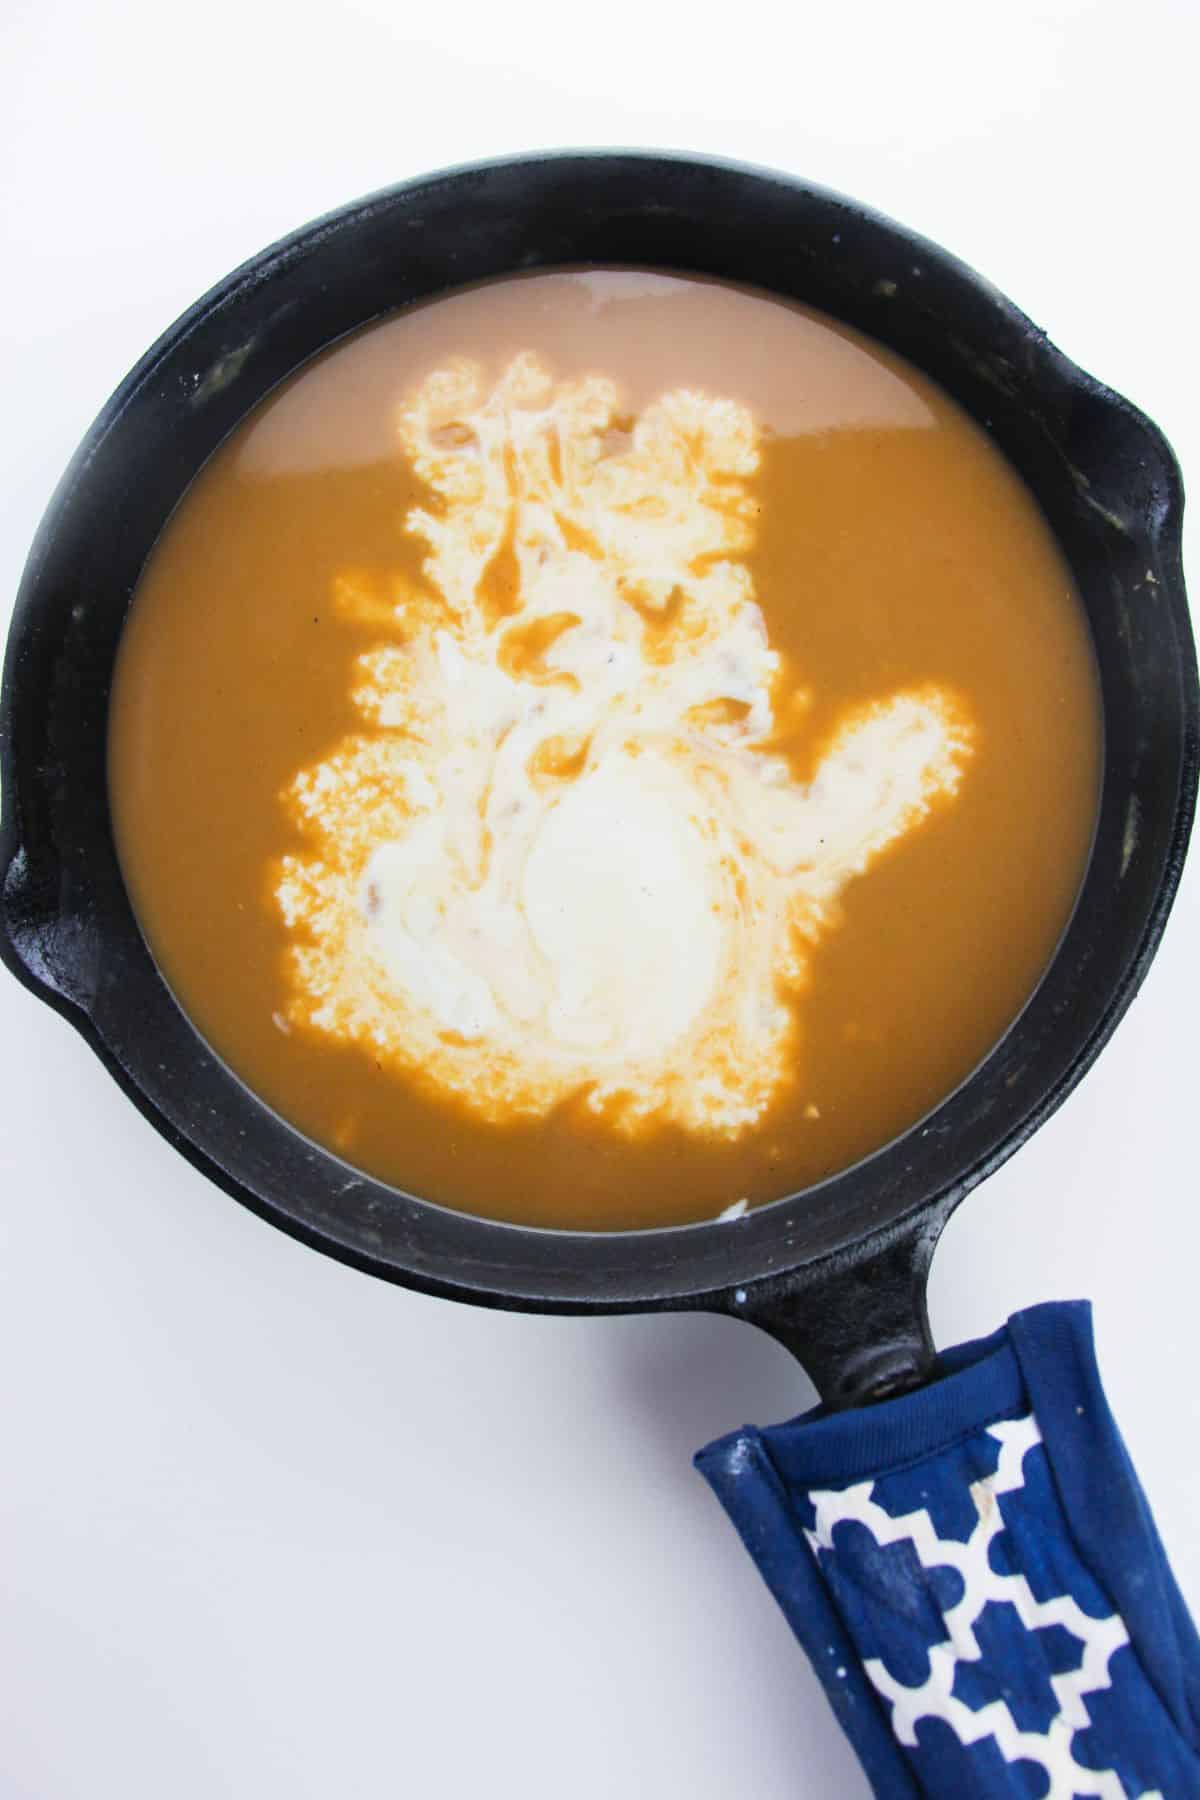 The milk is added to the gravy.